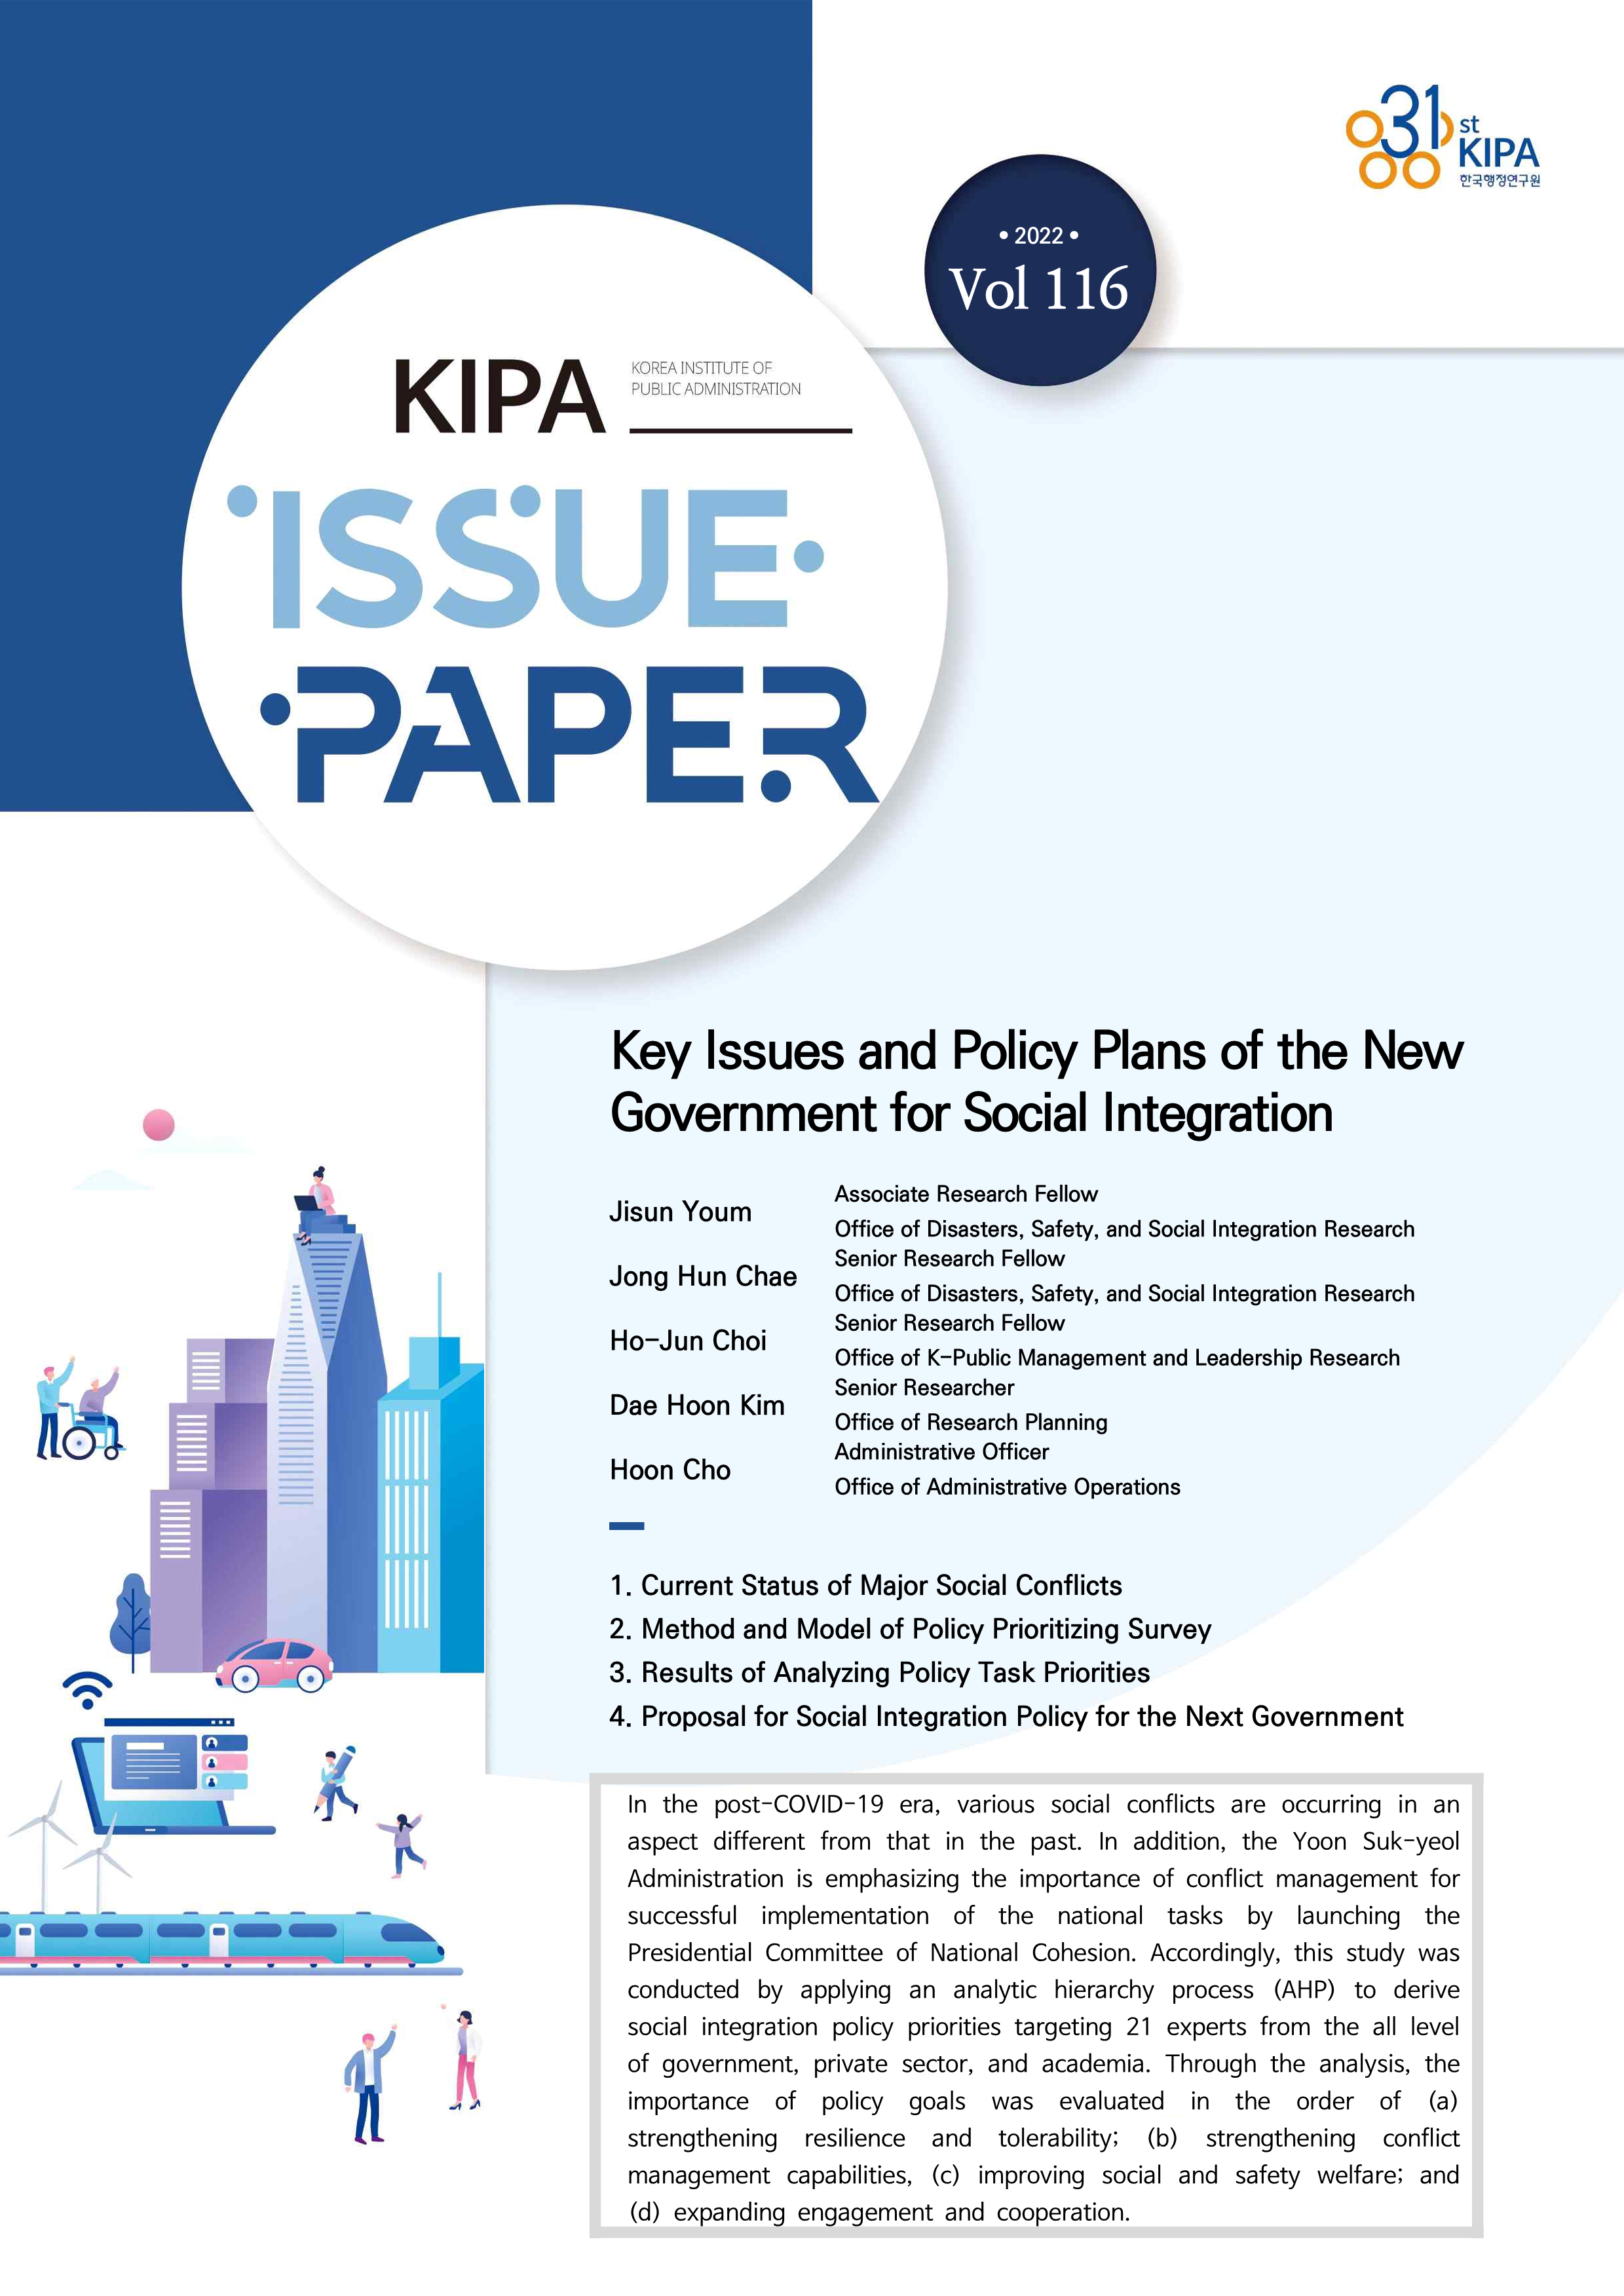 《Vol. 116》 Key Issues and Policy Plans of the New Government for Social Integration